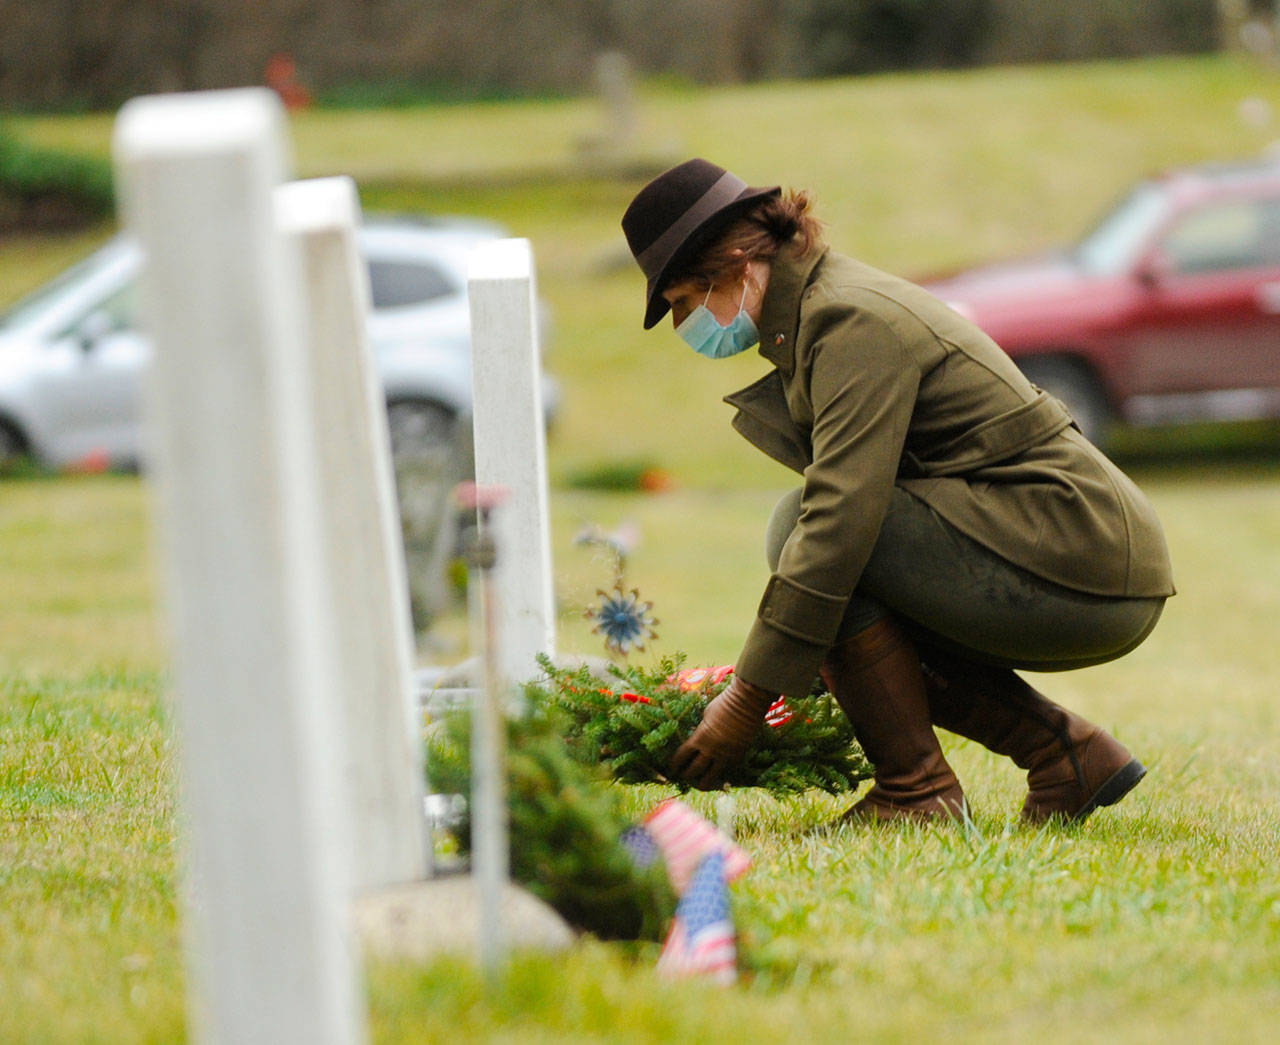 Lance Cpl. Holly Rowan, a U.S. Marine Corps veteran, lays a ceremonial wreath at Saturday’s Wreaths Across America event at Sequim View Cemetery. (Michael Dashiell/Olympic Peninsula News Group)